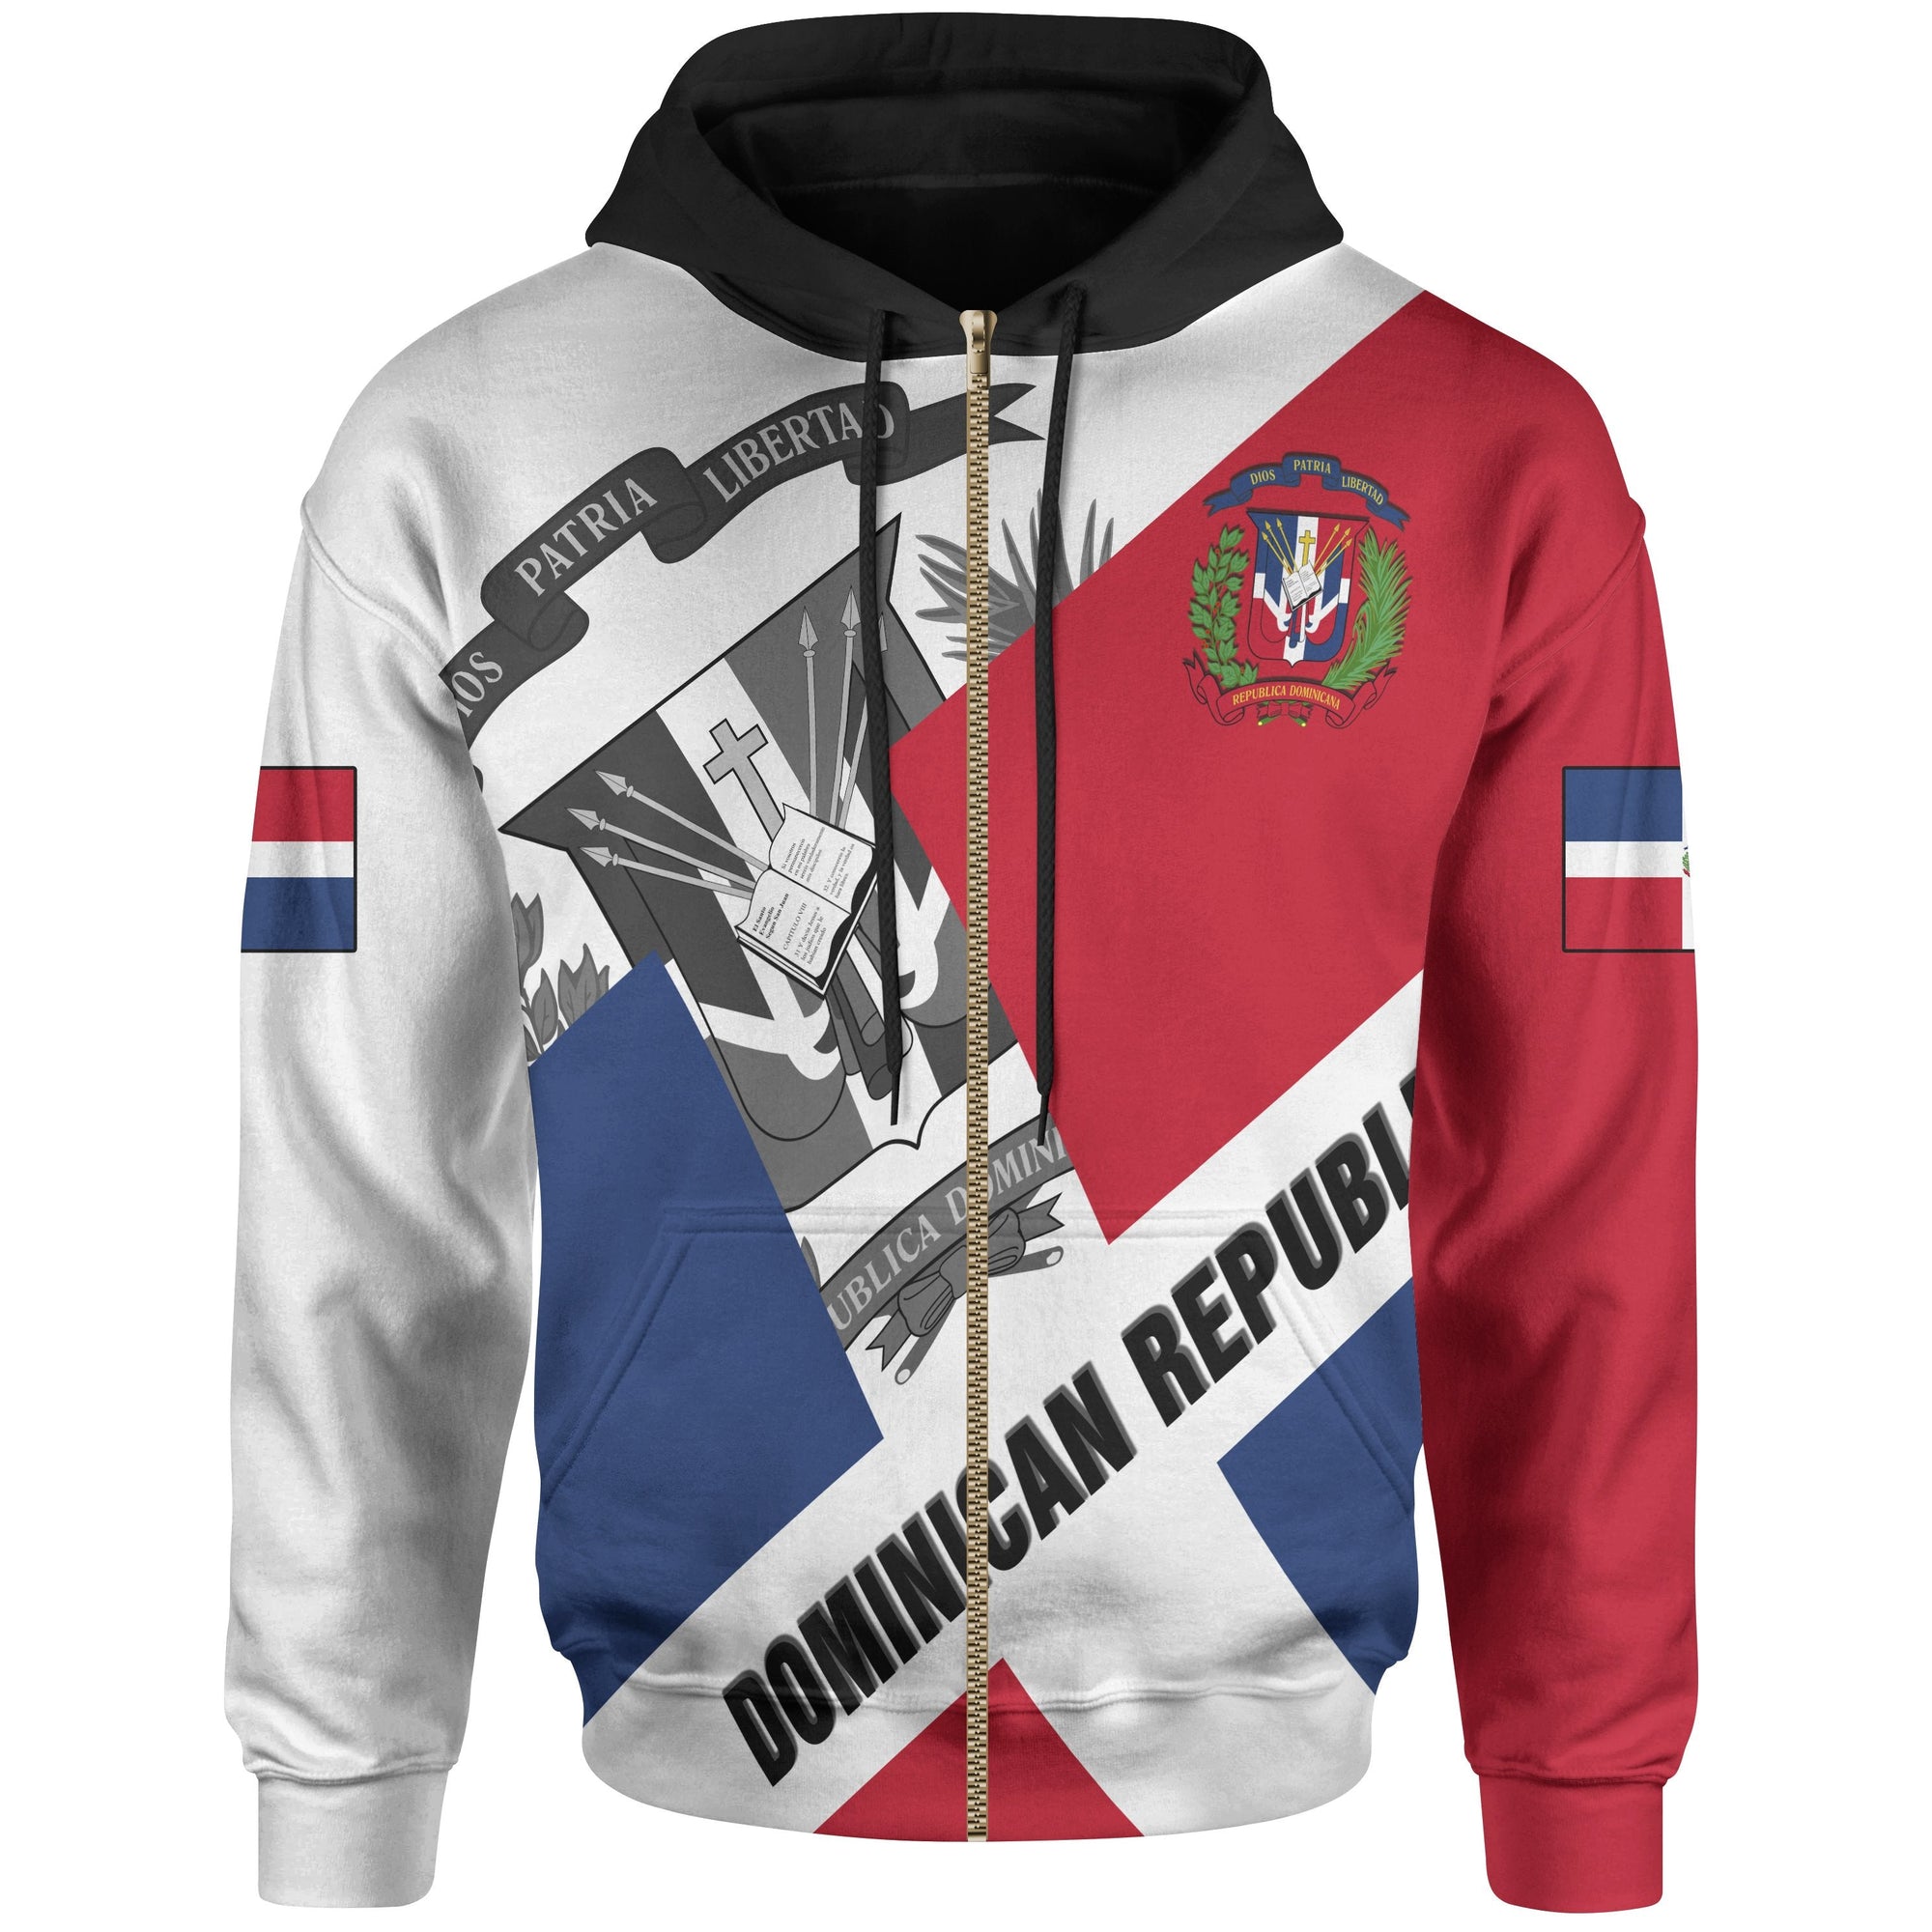 dominican-republic-zip-up-hoodie-flag-and-coat-of-arms